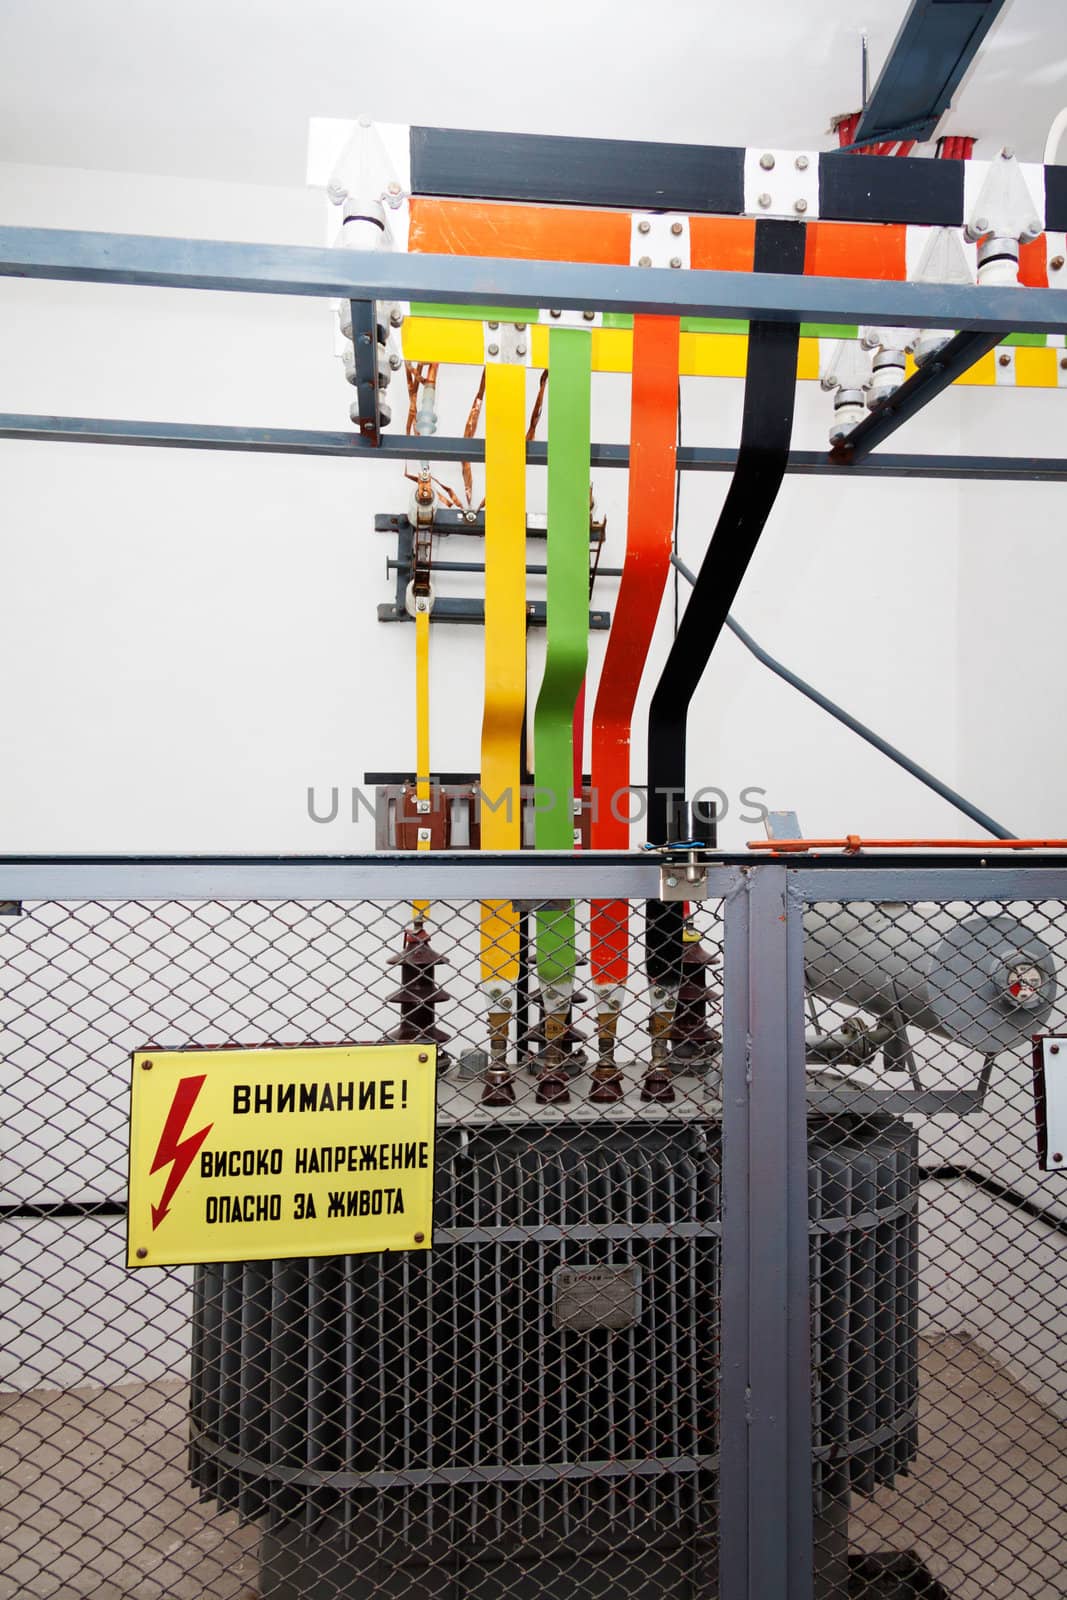 High voltage transformator with warning sign